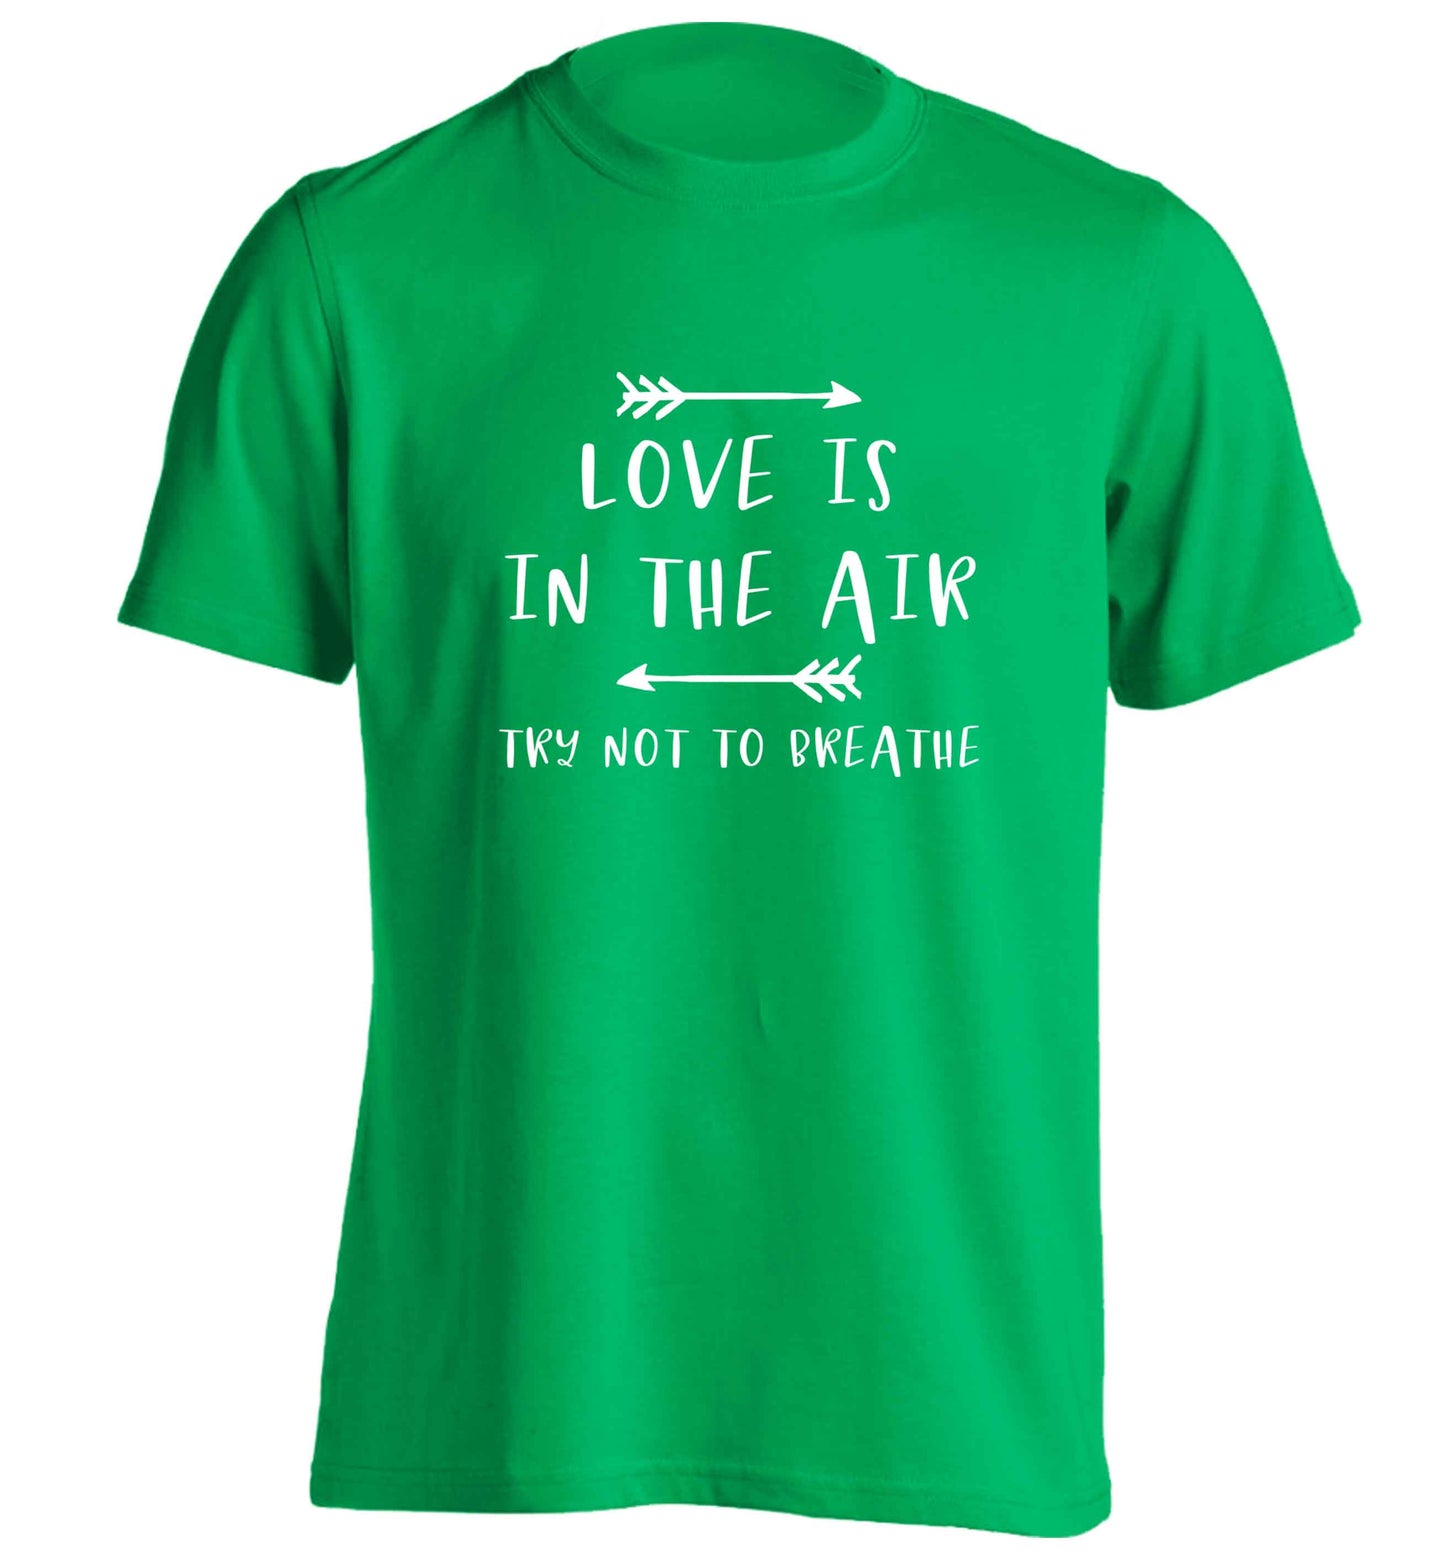 Love is in the air try not to breathe adults unisex green Tshirt 2XL